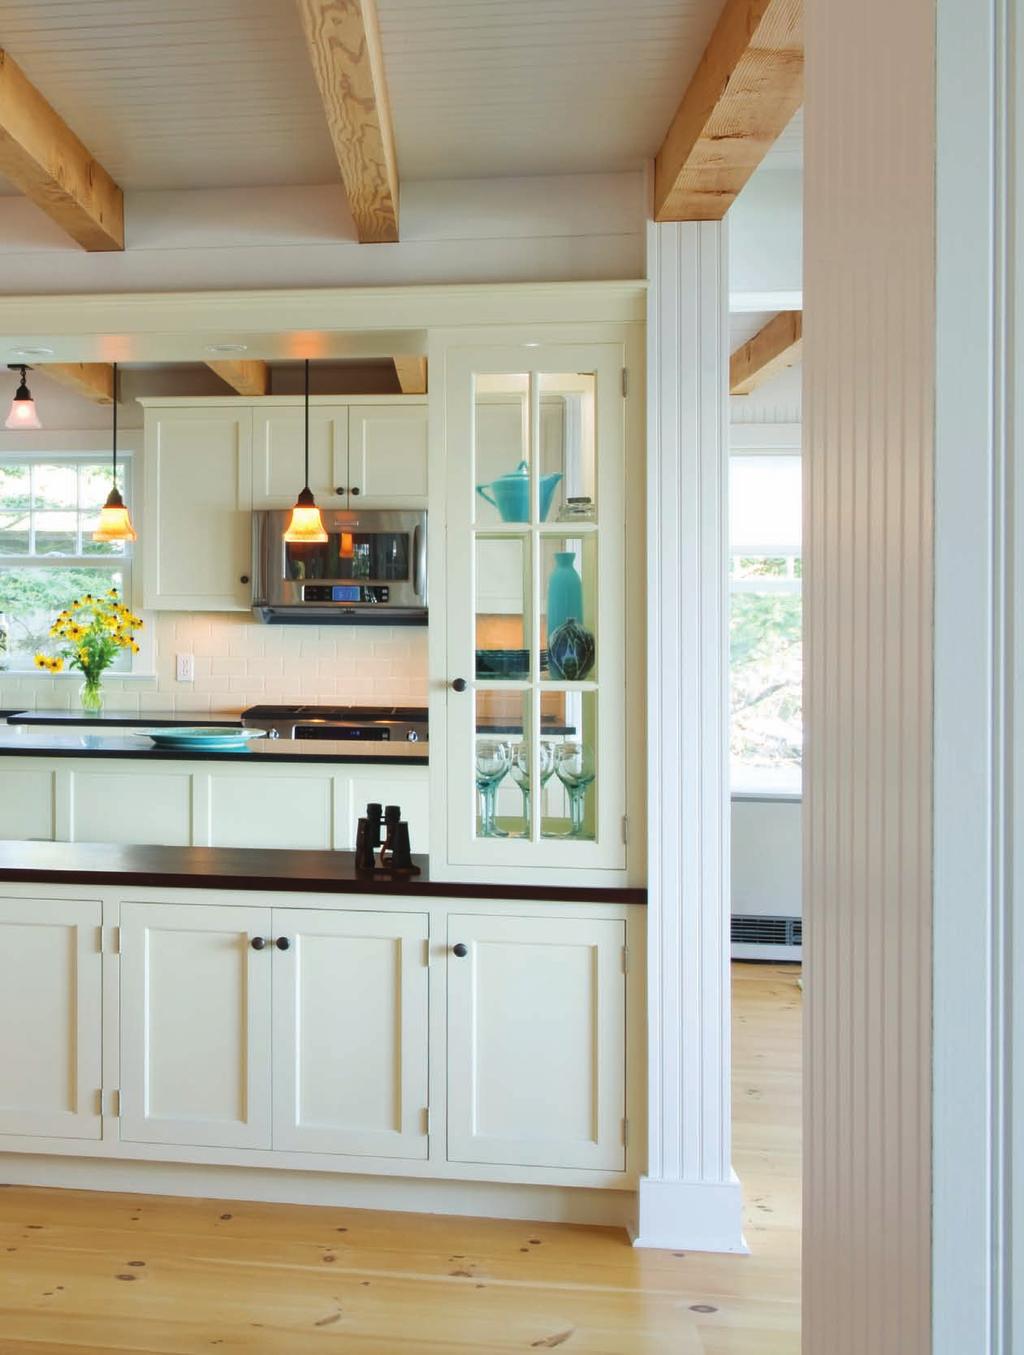 Modern Farmhouse Kitchen renovations with farmhouse style harken back to a simpler time.